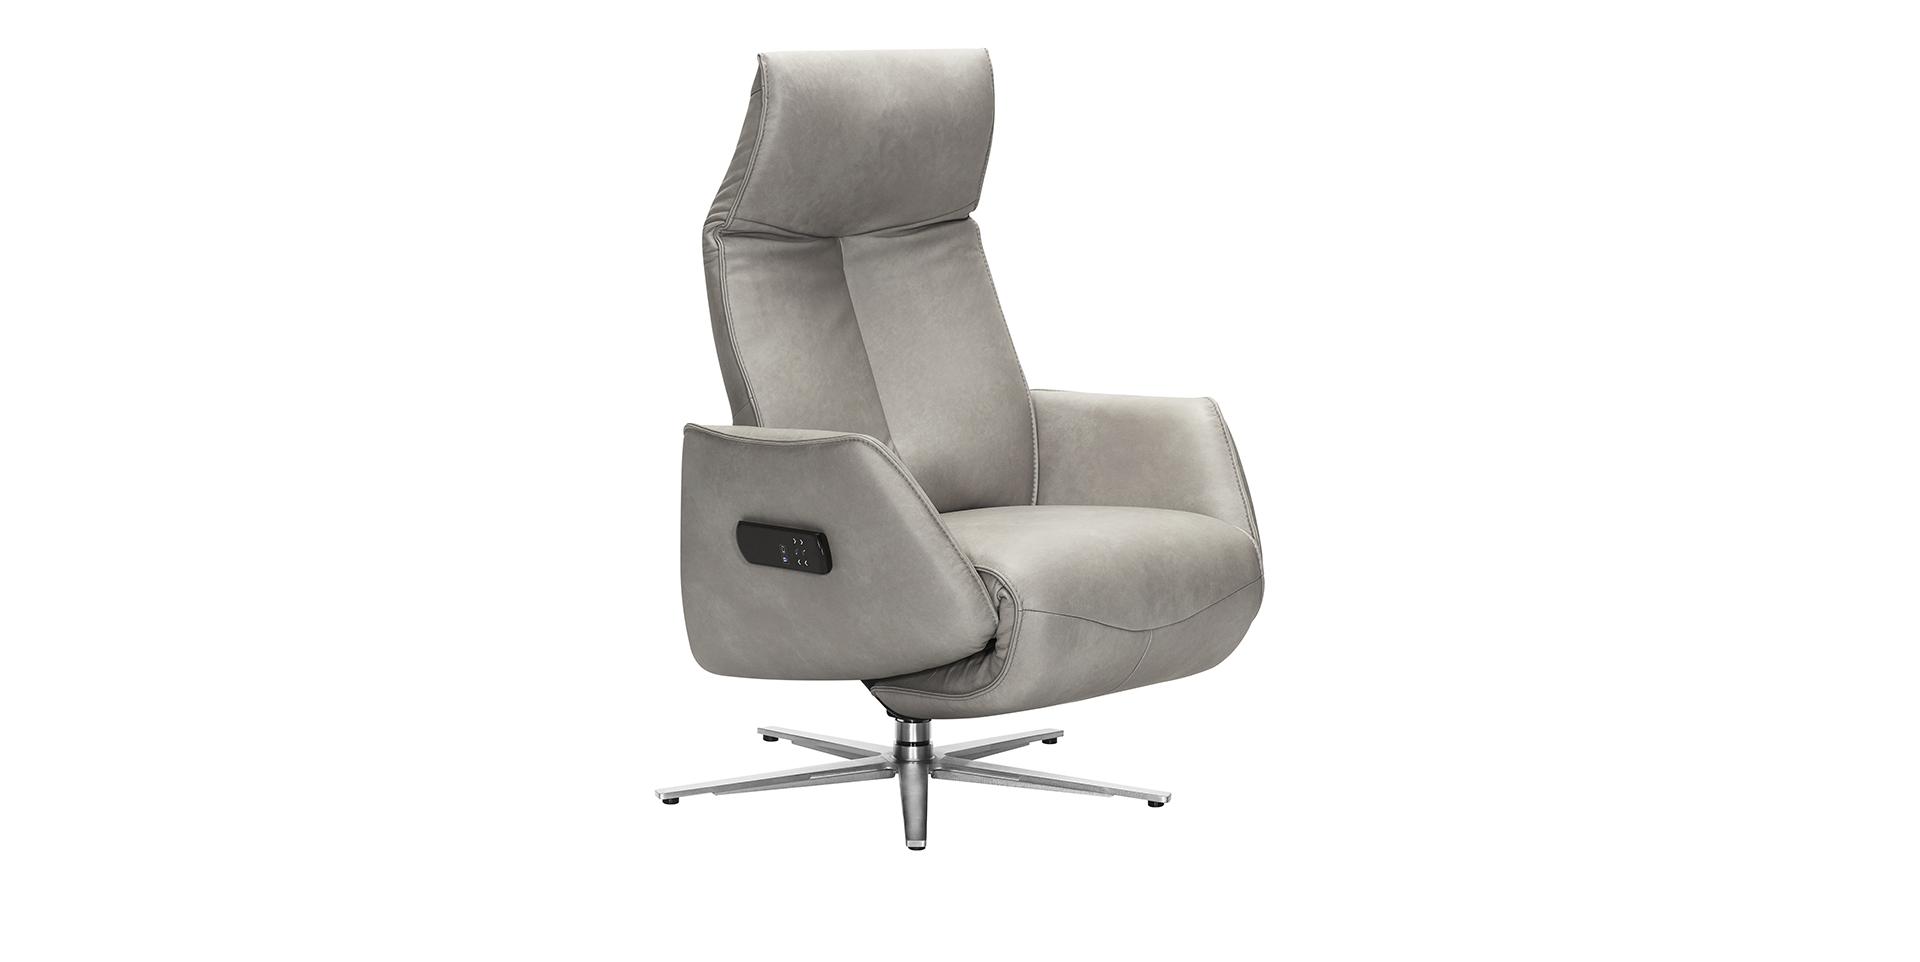 Slider Fauteuil relaxation 7917 (image 3)